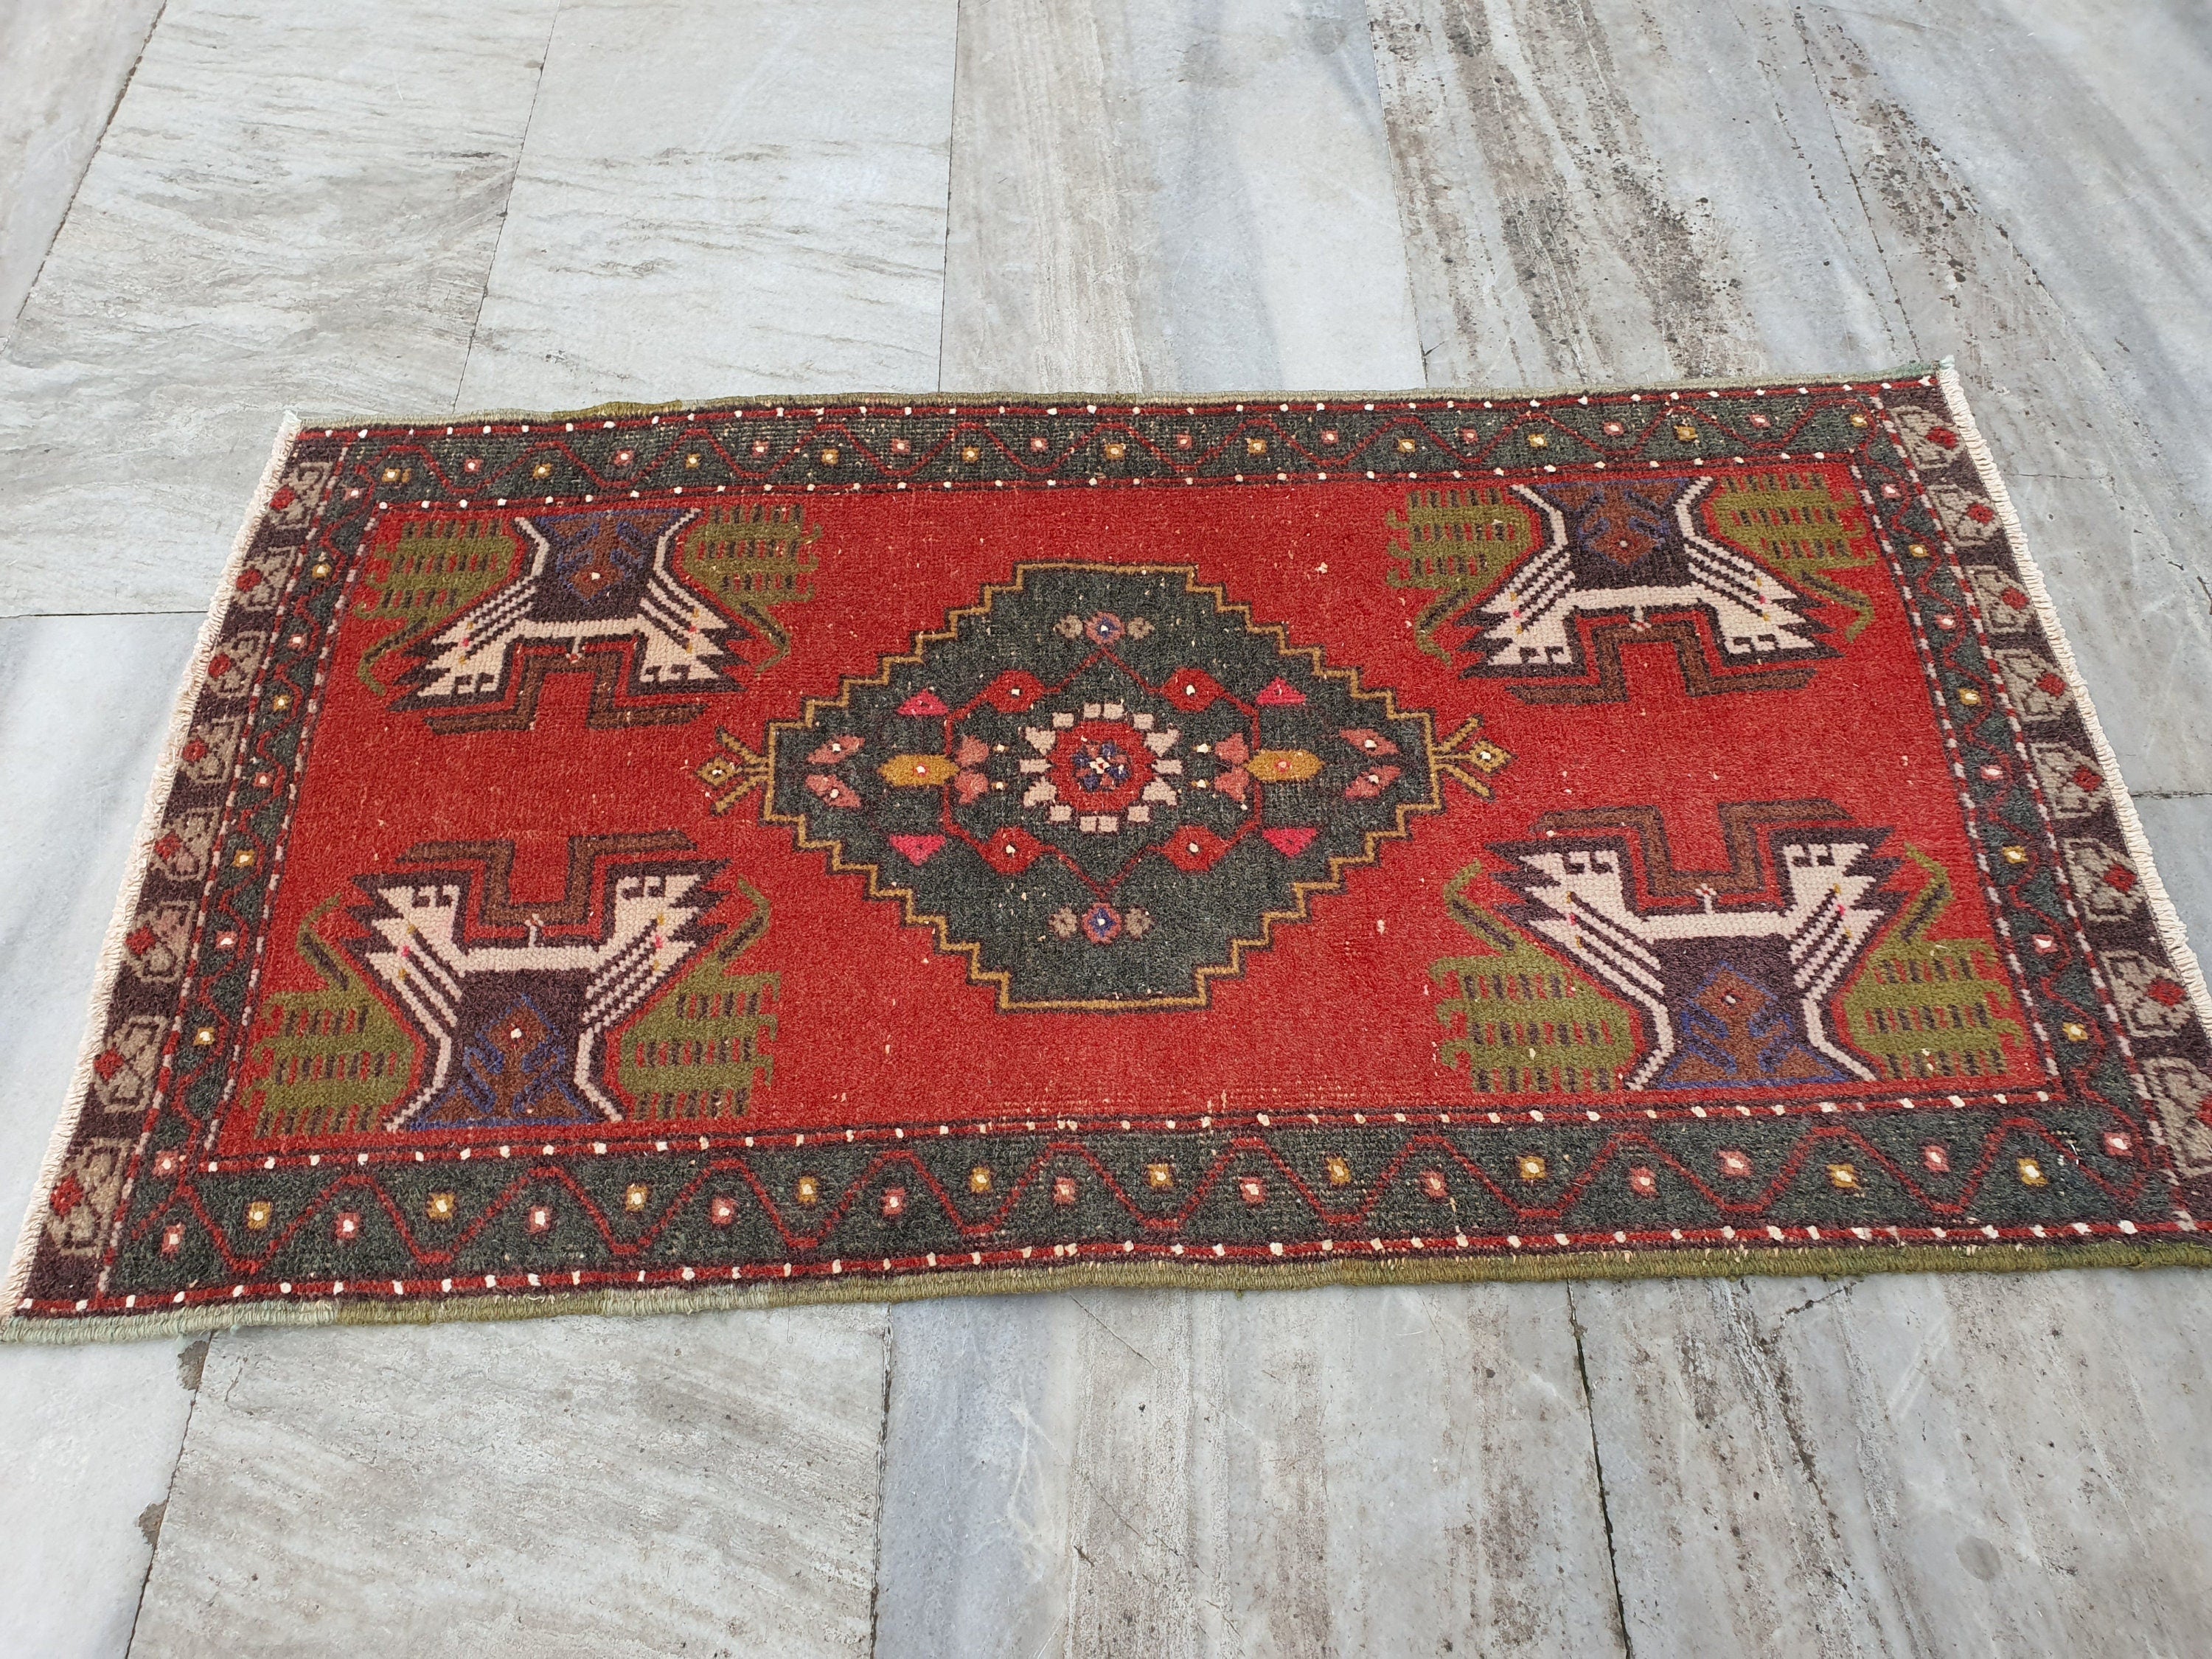 Vintage Turkish Small Rug, 3 ft 3 in x 1 ft 8 in, Pink, Green/Grey and Beige Faded Distressed Antique Style Mat